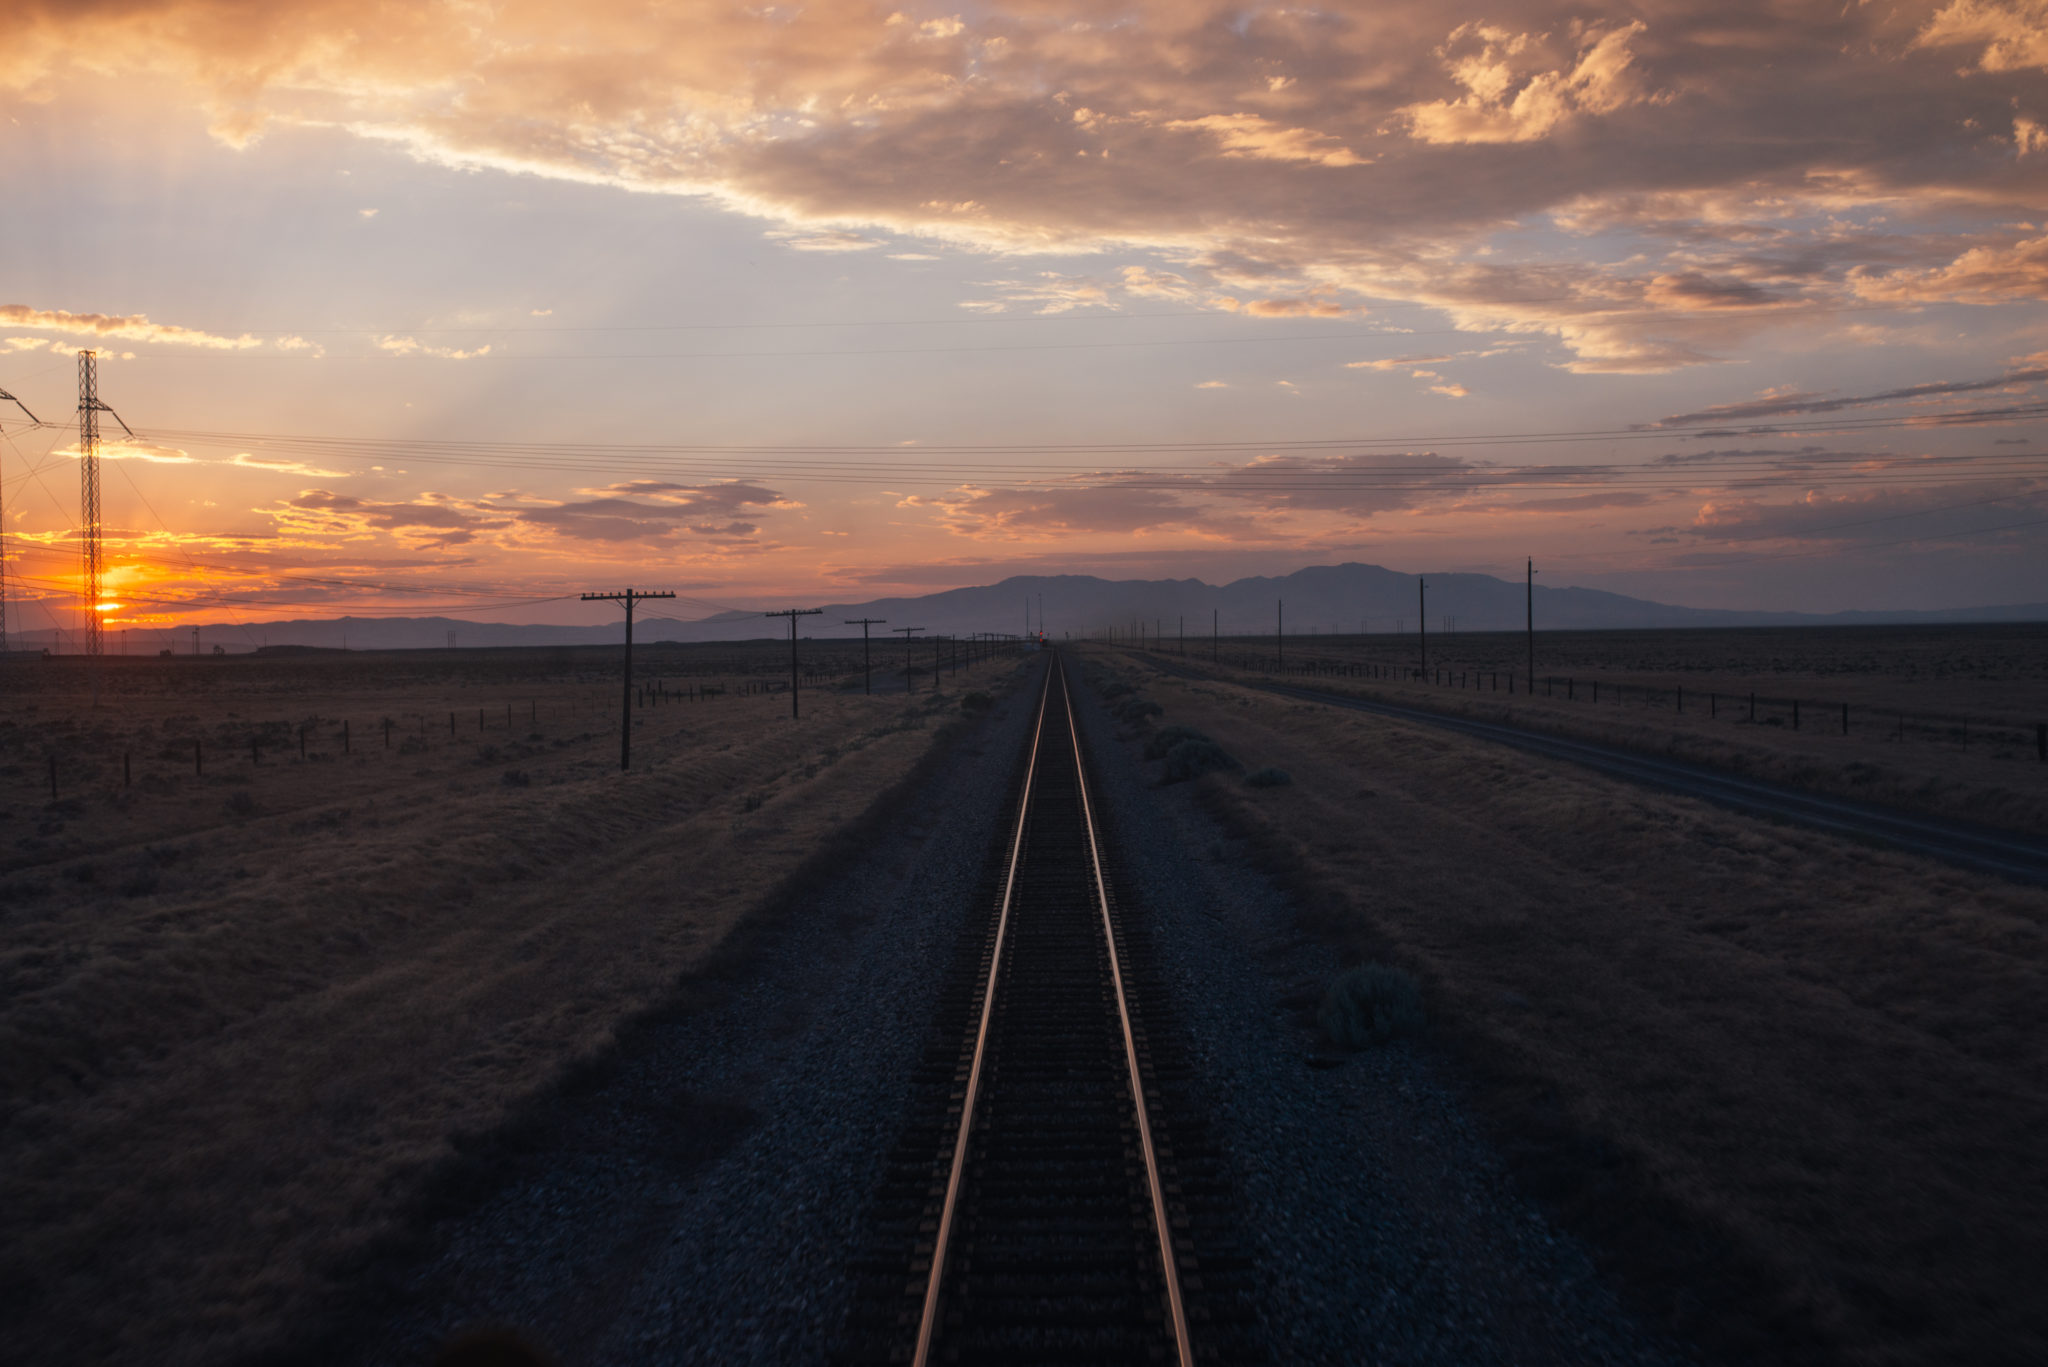 Tips for Photographing Your Amtrak Adventure